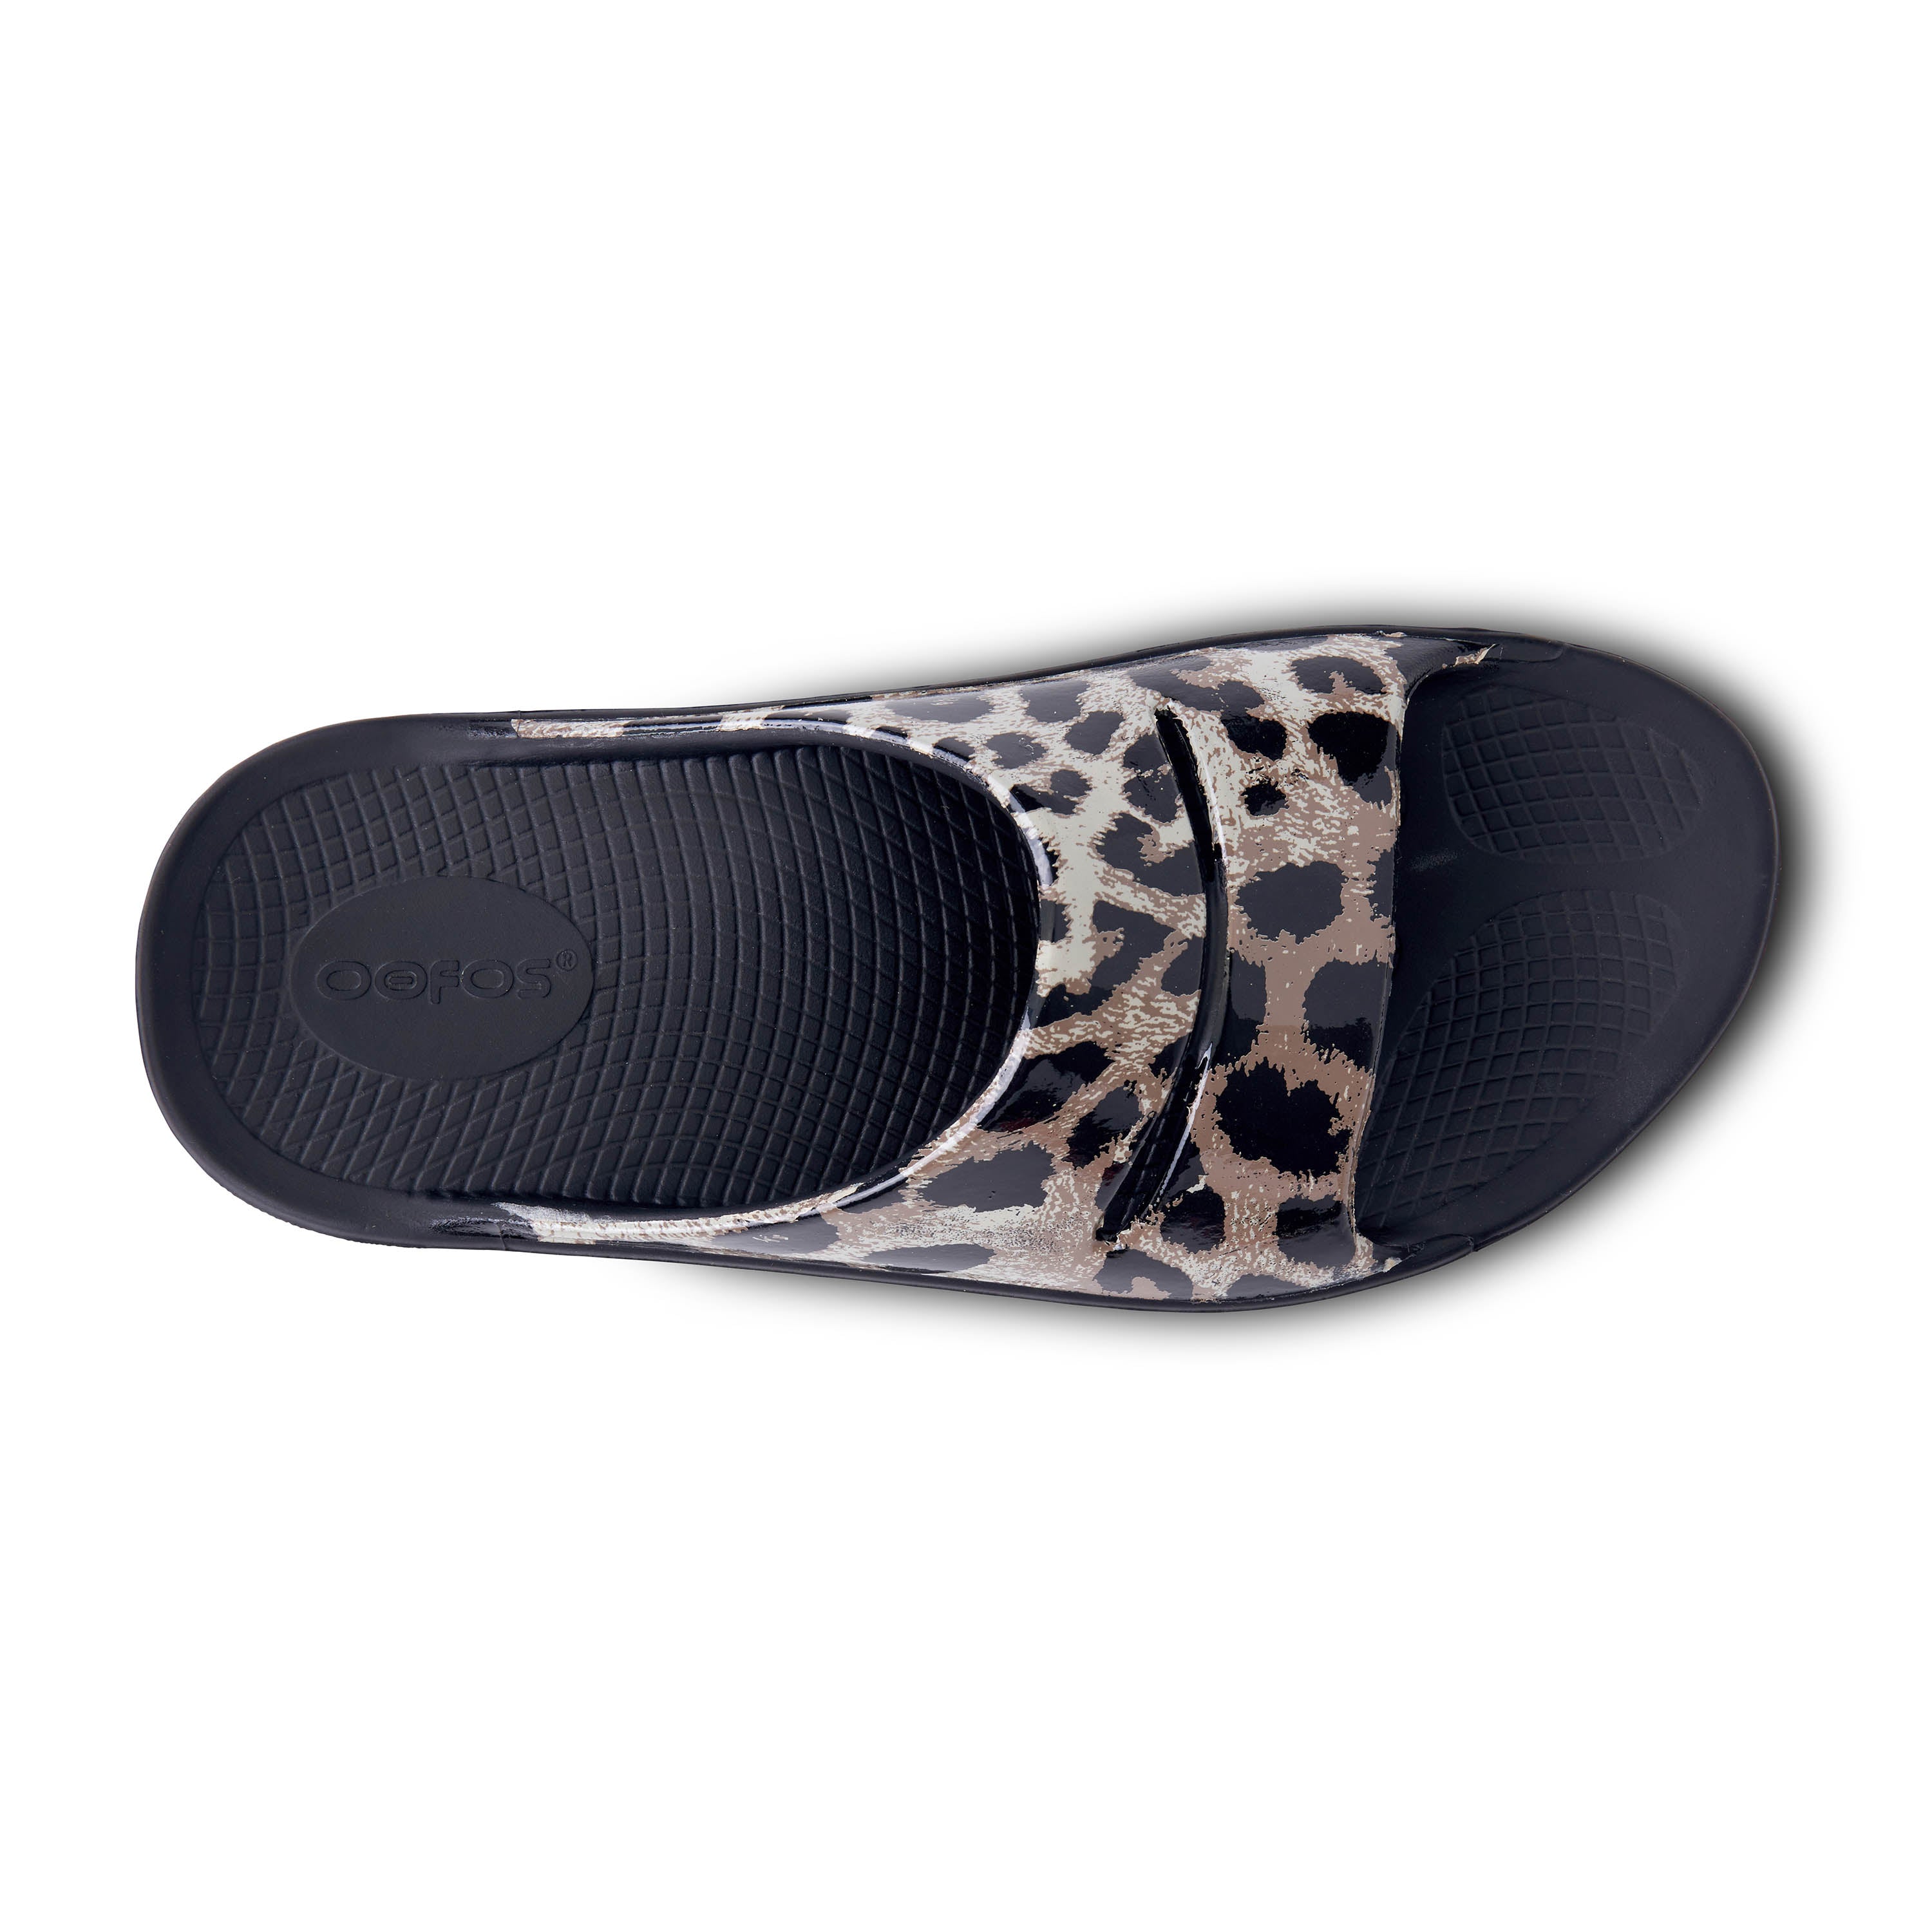 OOFOS WOMEN'S OOAHH SLIDE LIMITED 